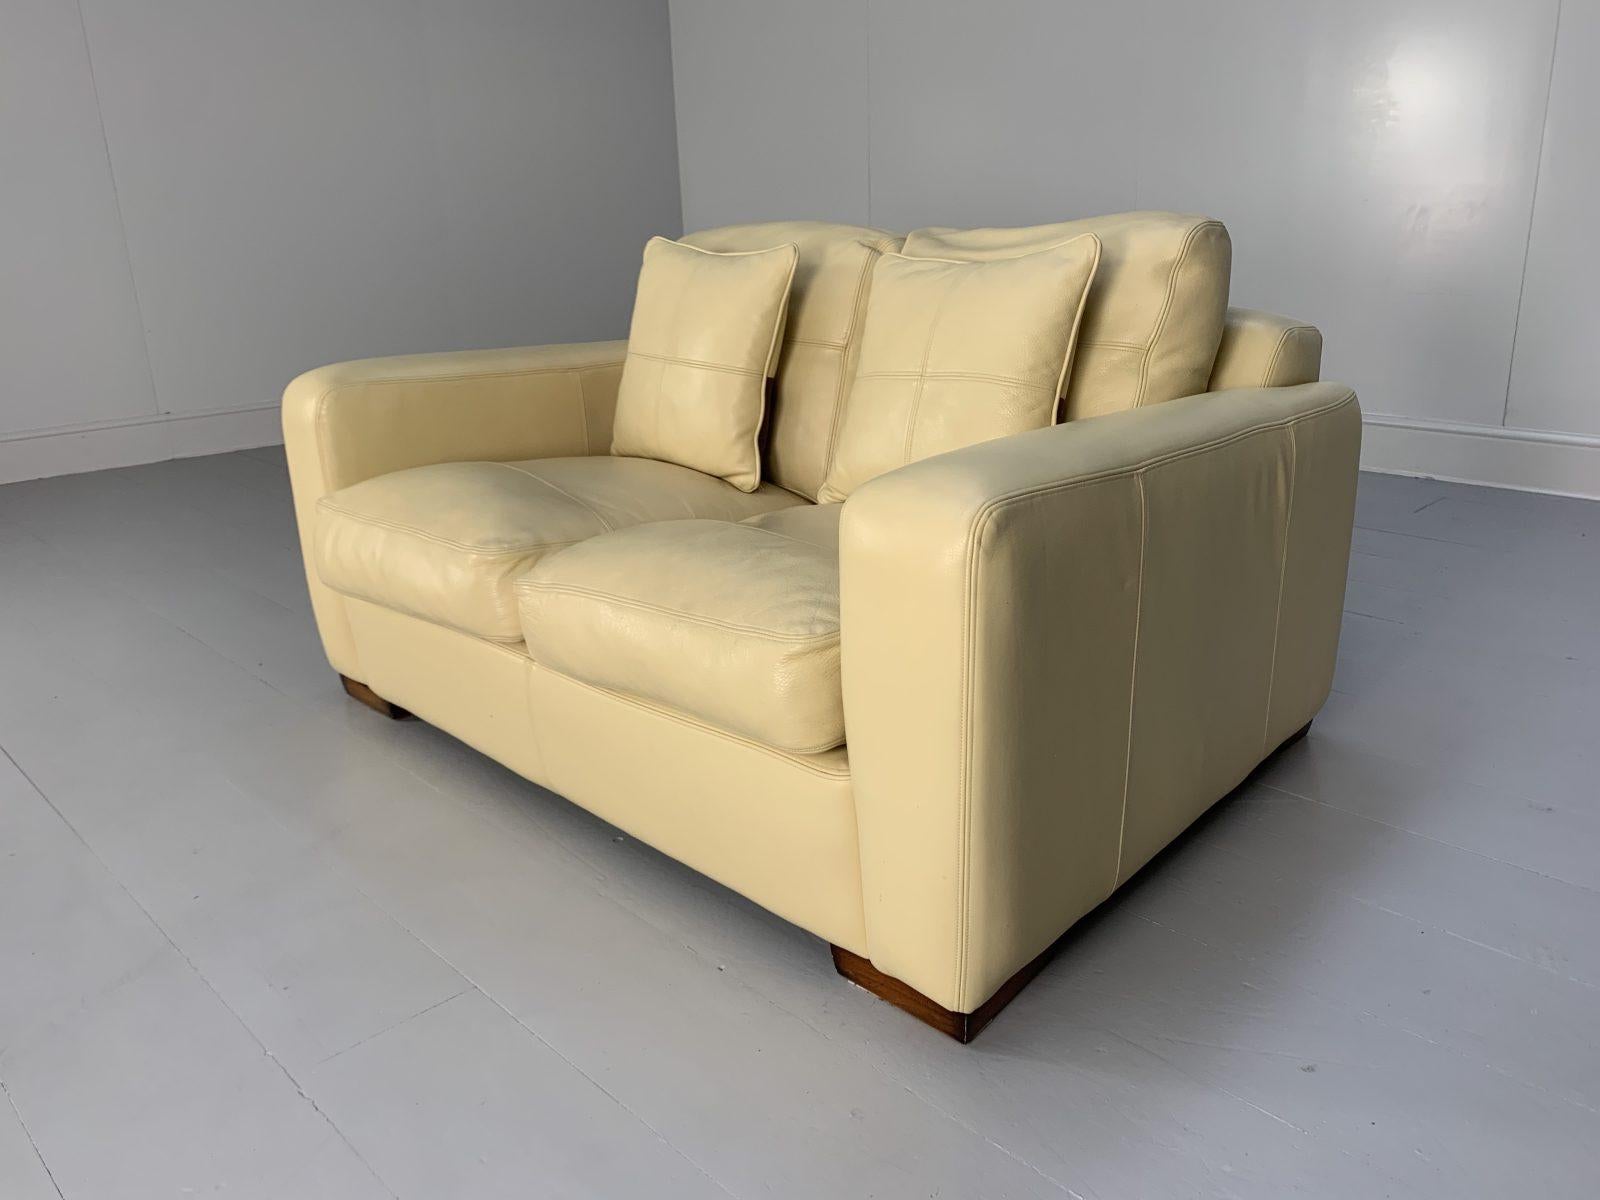 Duresta “Panther” 2-Seat Sofa – in Cream Leather For Sale 1